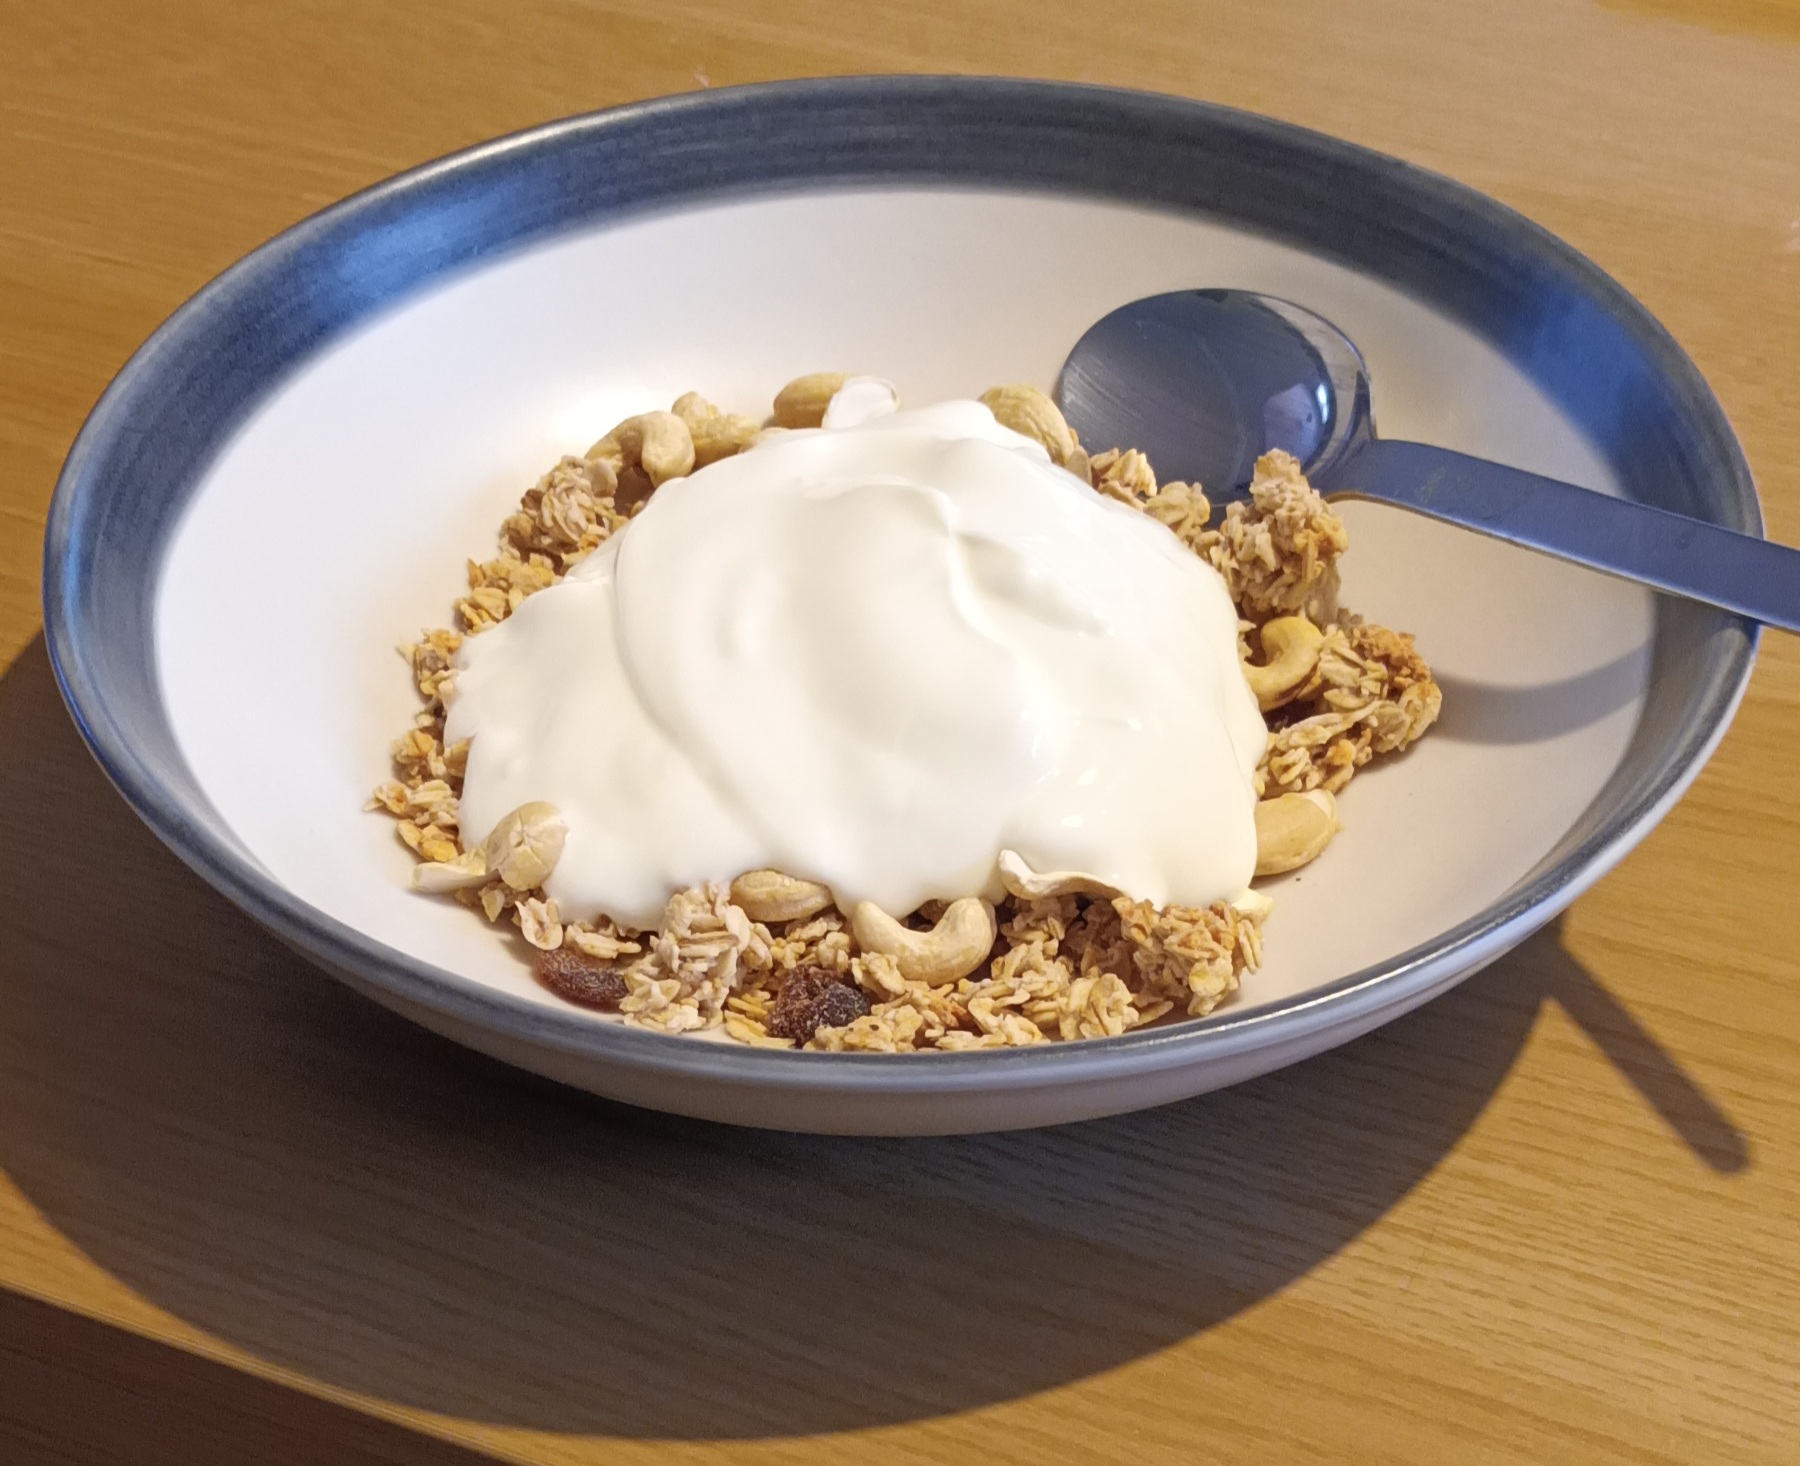 Photo of a dollop of yoghurt on top of some breakfast cereal in a bowl with a spoon.